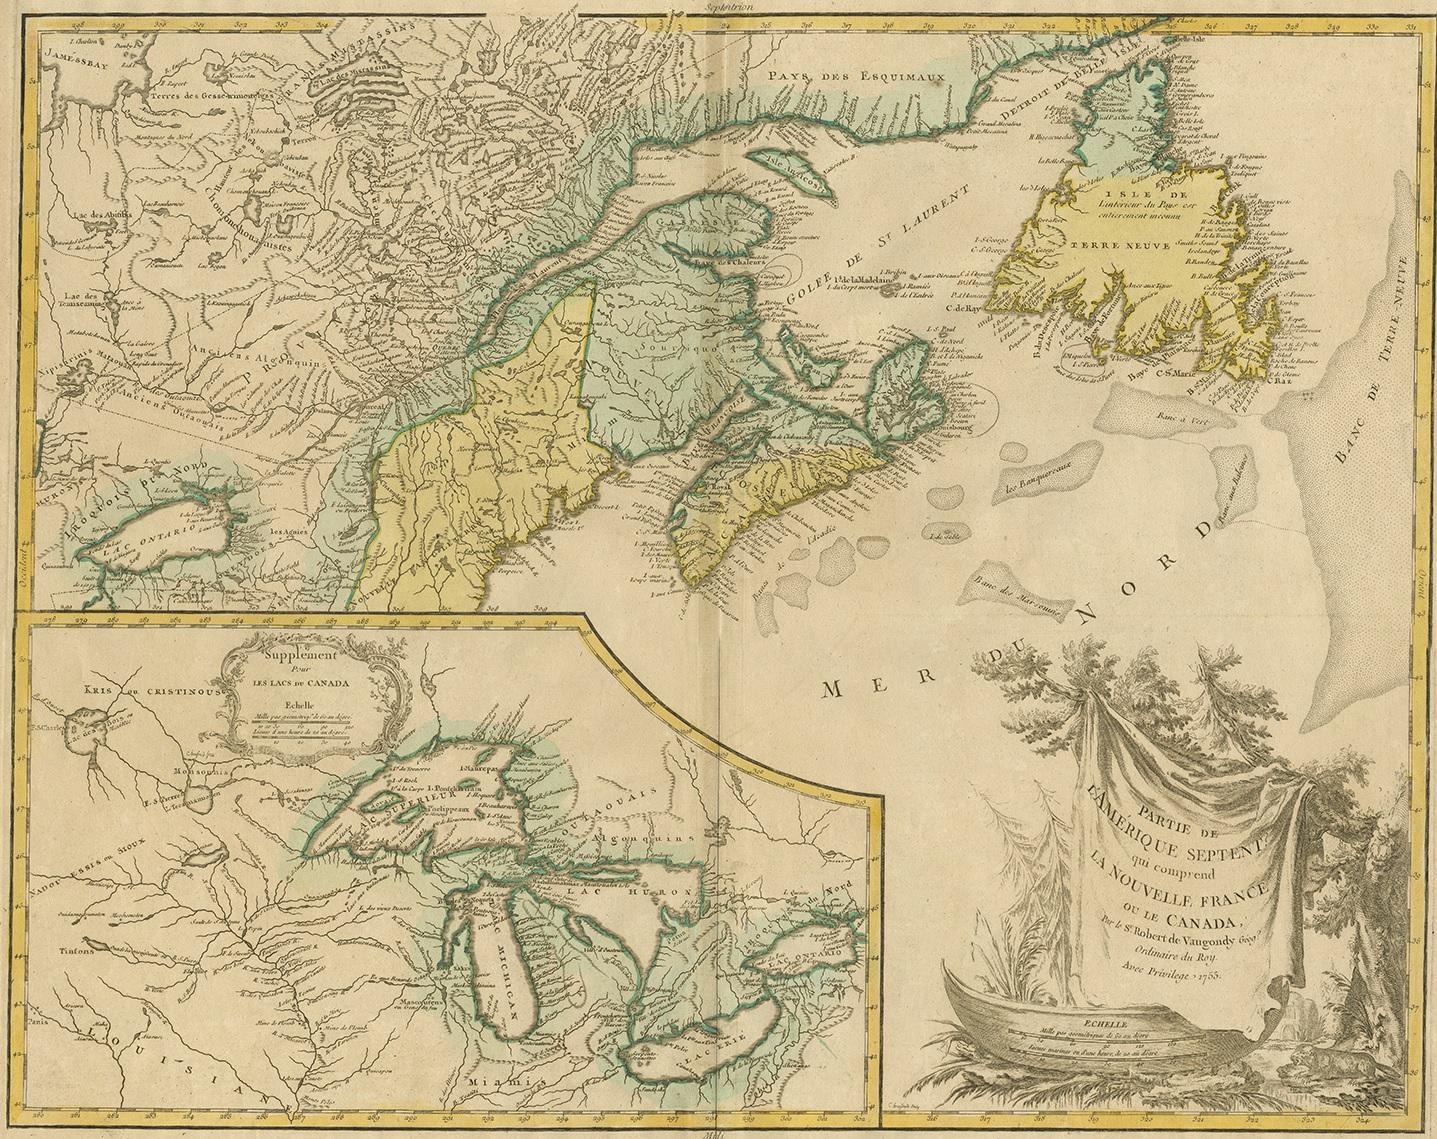 Antique map titled 'Partie de l'Amérique septent qui comprend la nouvelle France ou le Canada'. Decorative and highly detailed map of New England and part of Canada, extending east to Newfoundland, with a large inset map of the Great Lakes. The map